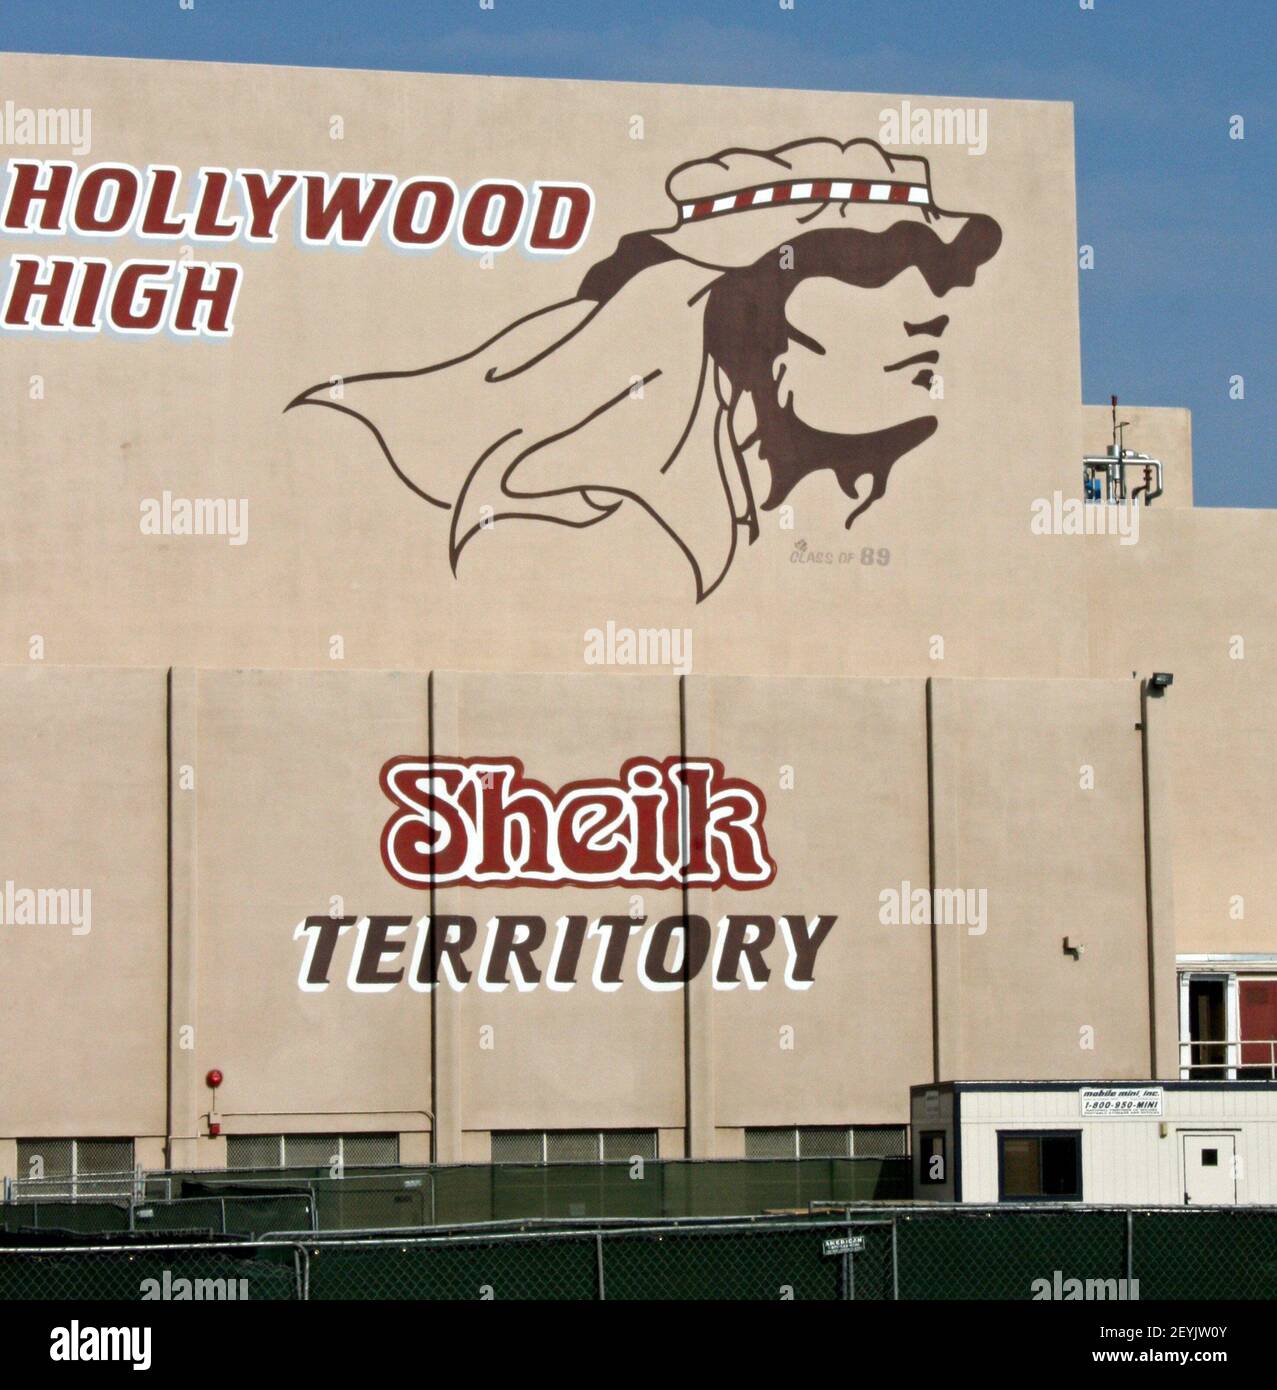 Hollywood High School's mascot is the Sheiks, and a portrait of Rudolph  Valentino in the movie The Sheik is painted on the auditorium wall  overlooking the school's athletic fields in Los Angeles